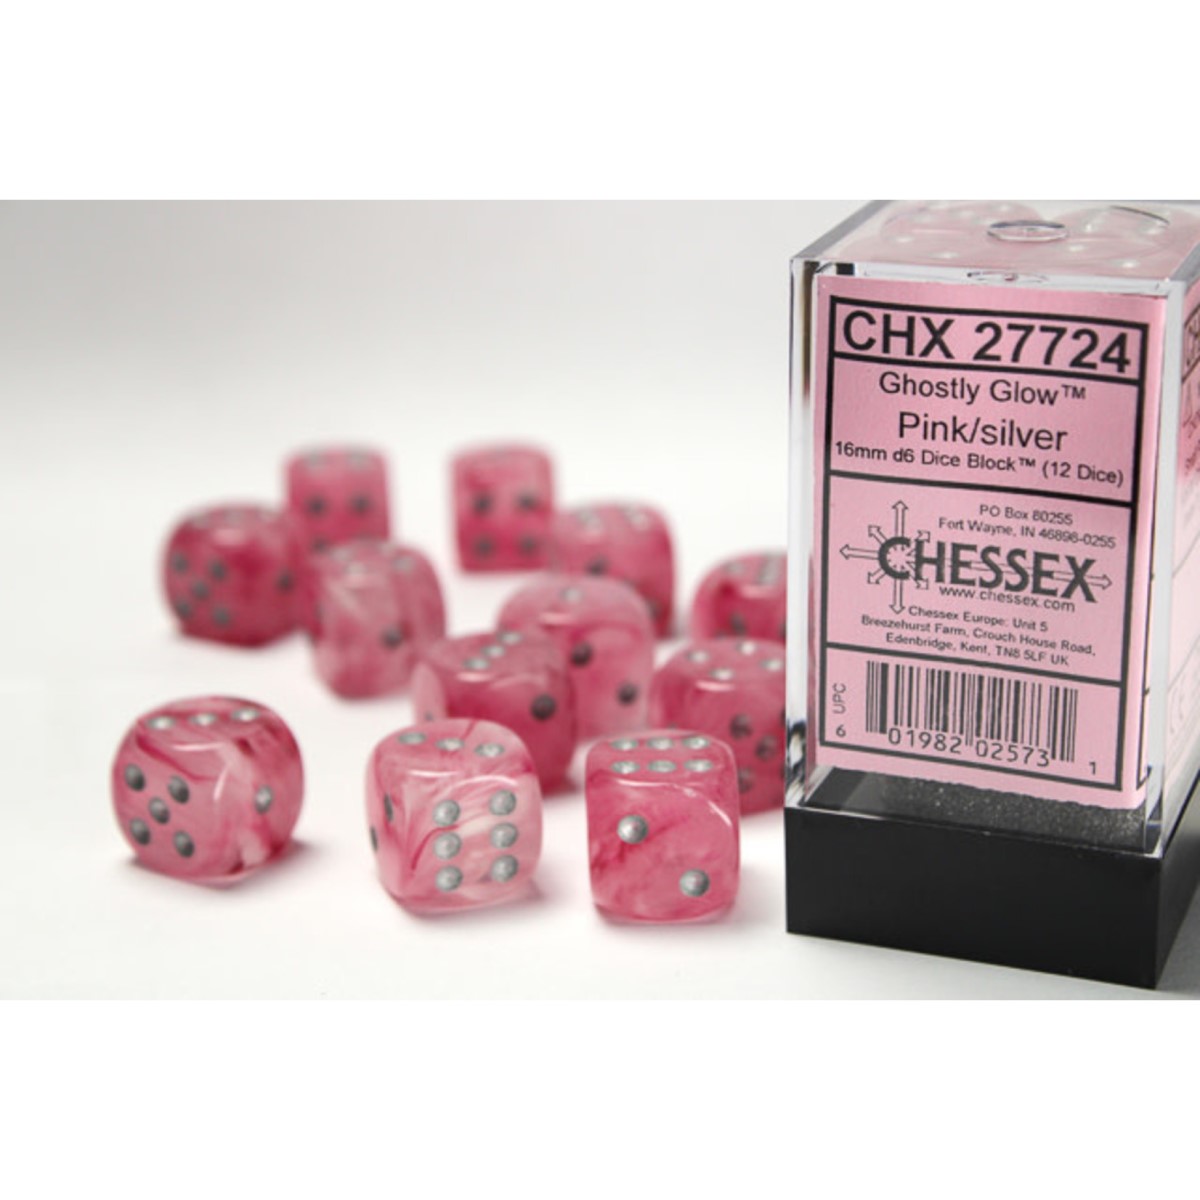 chessex-ghostly-glow-dice-pink-silver-16mm-d6-dice